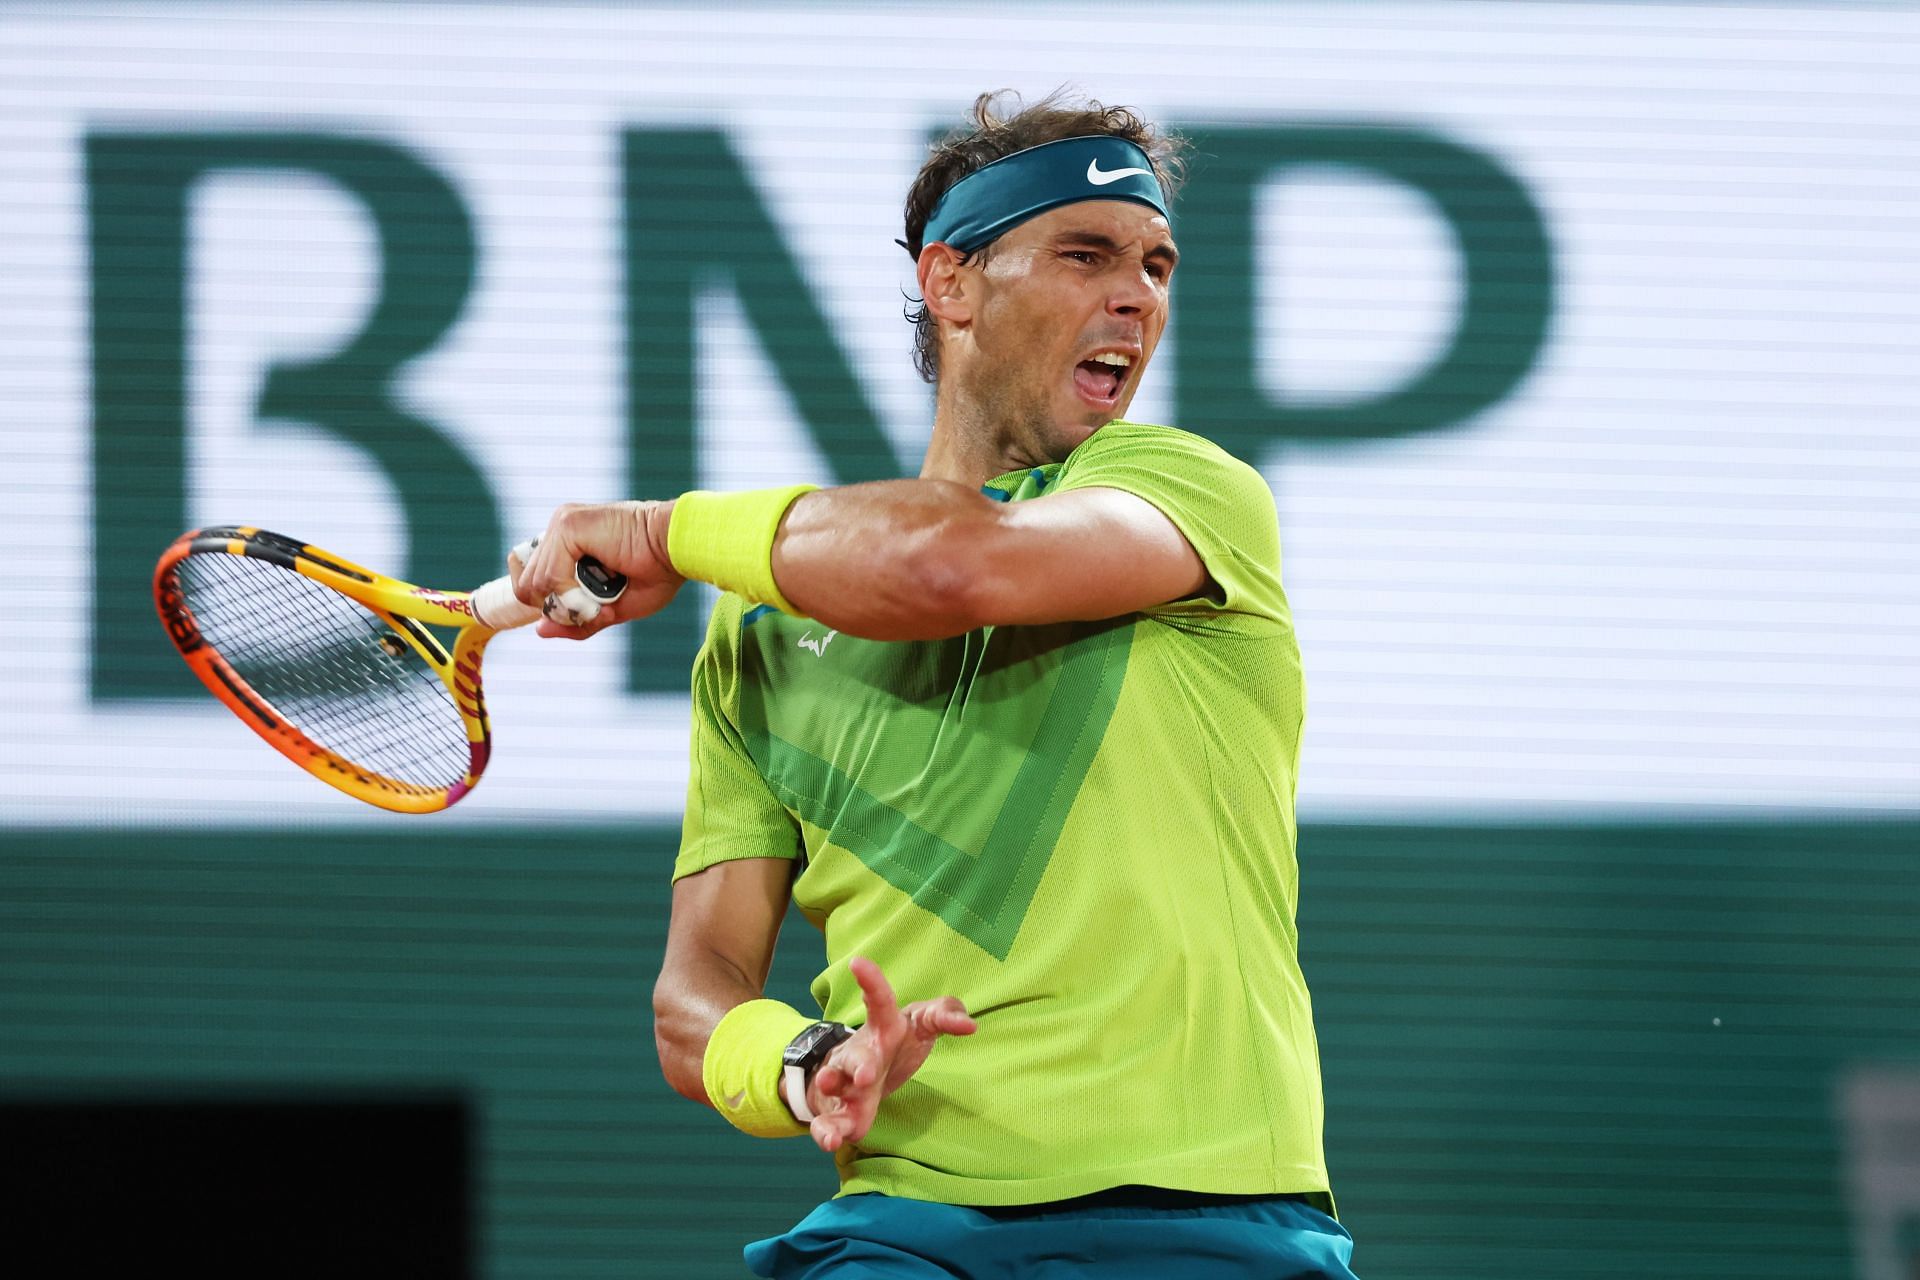 Rafael Nadal locks horns with Alexander Zverev in the semifinals of the 2022 French Open